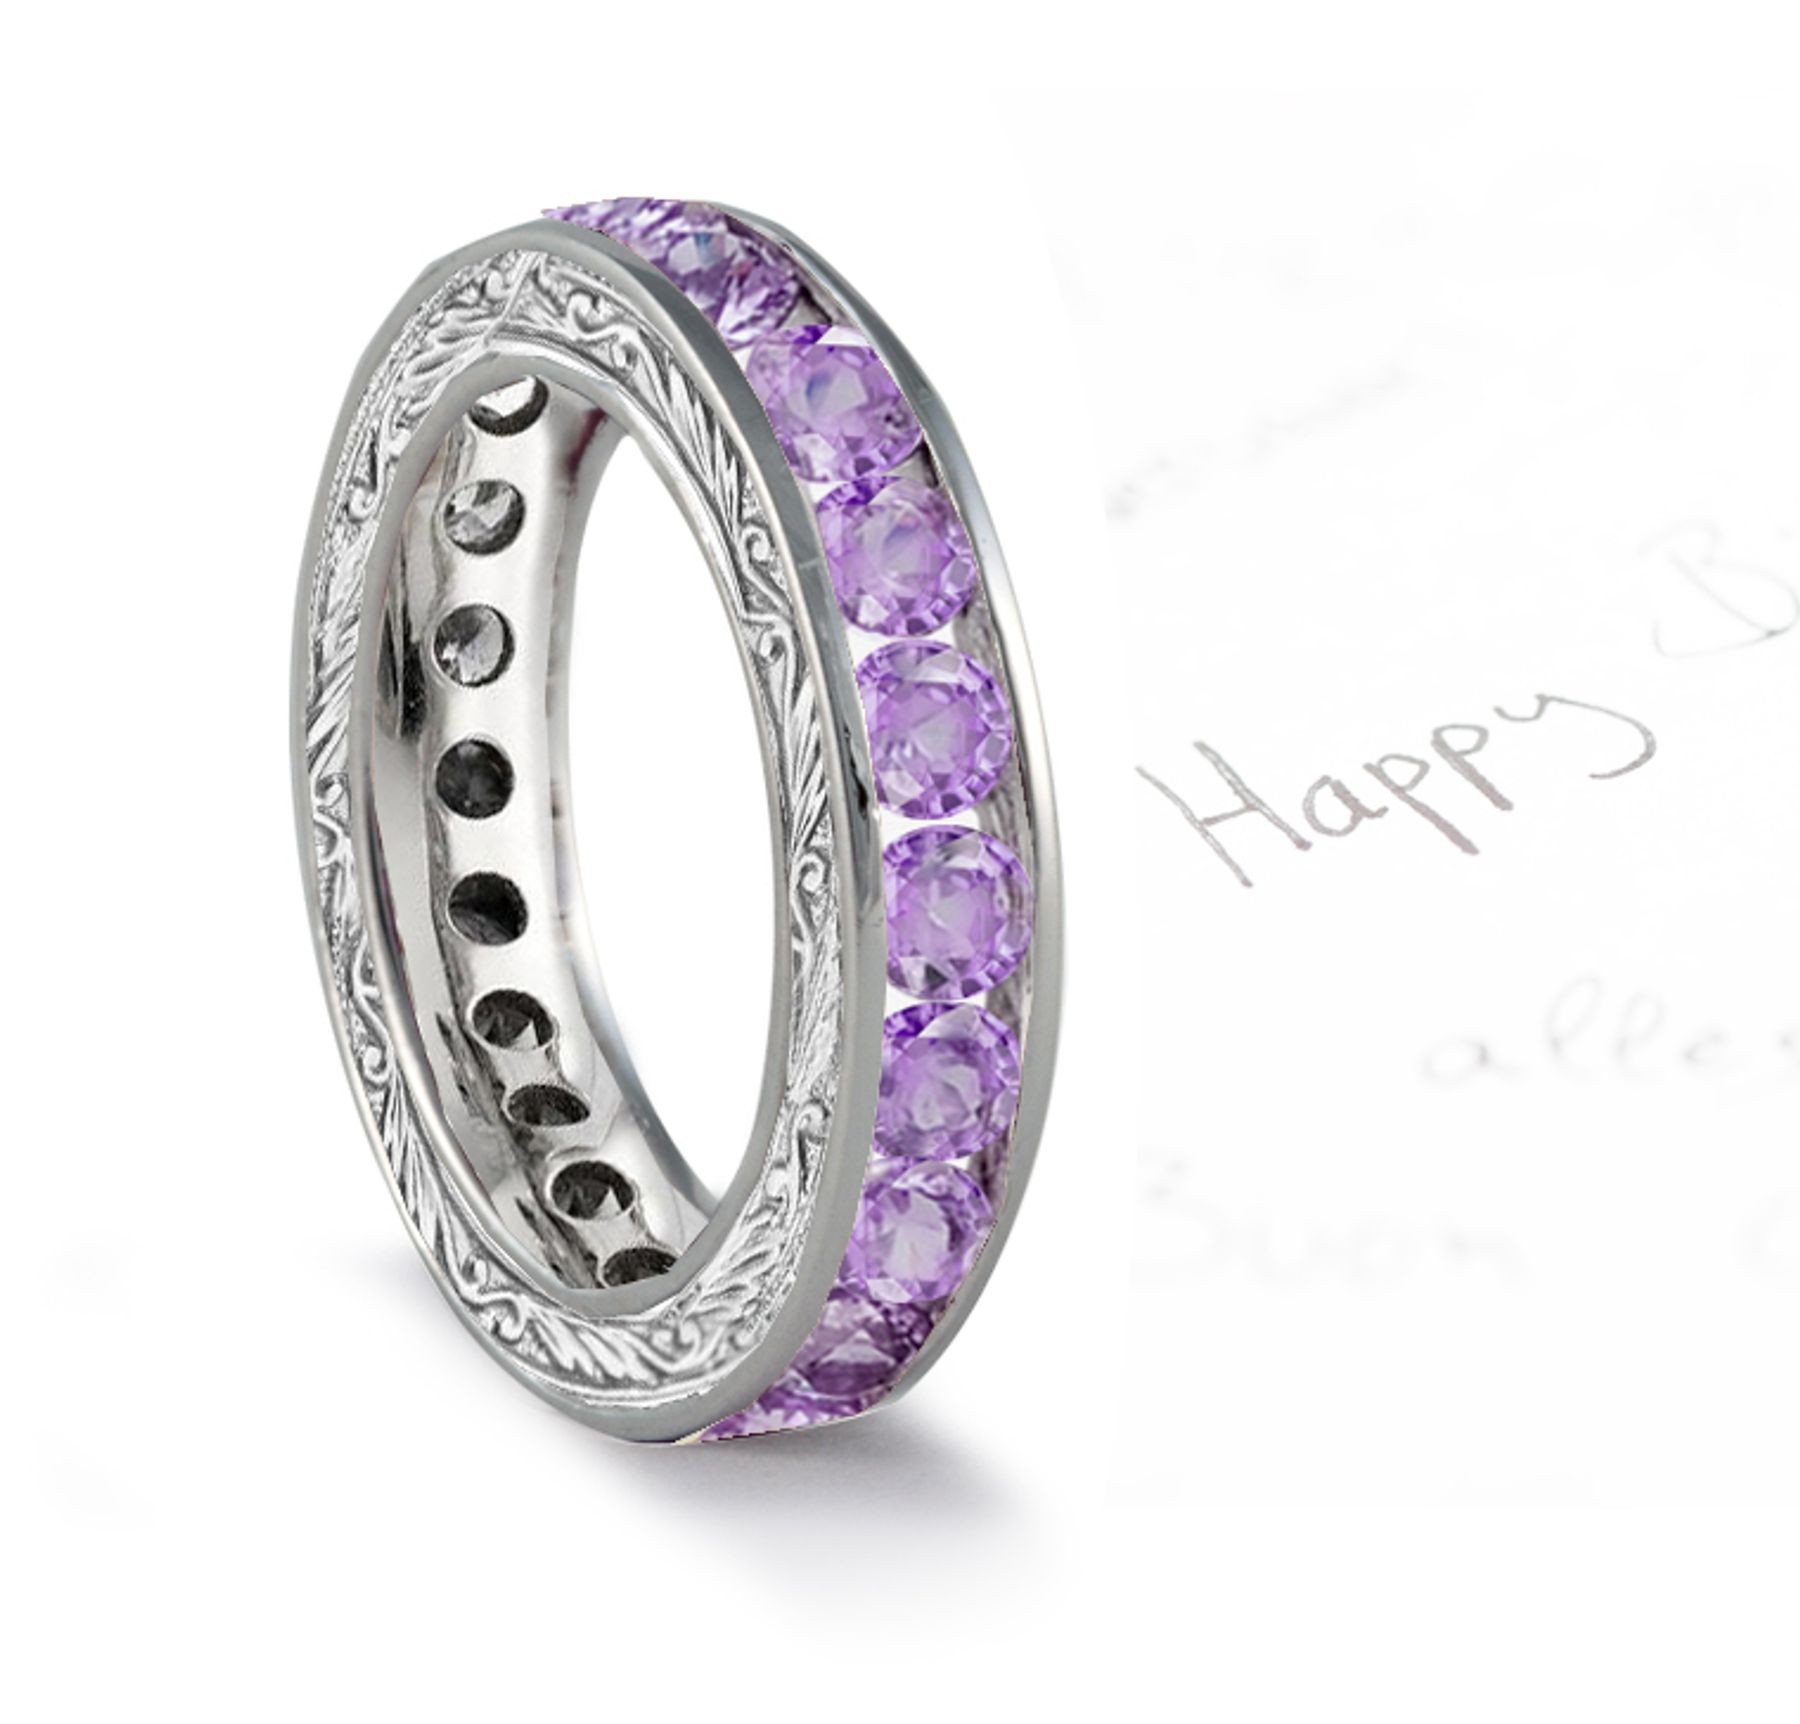 Unlimited Variety of Purple Sapphire Engraved Wedding Bands